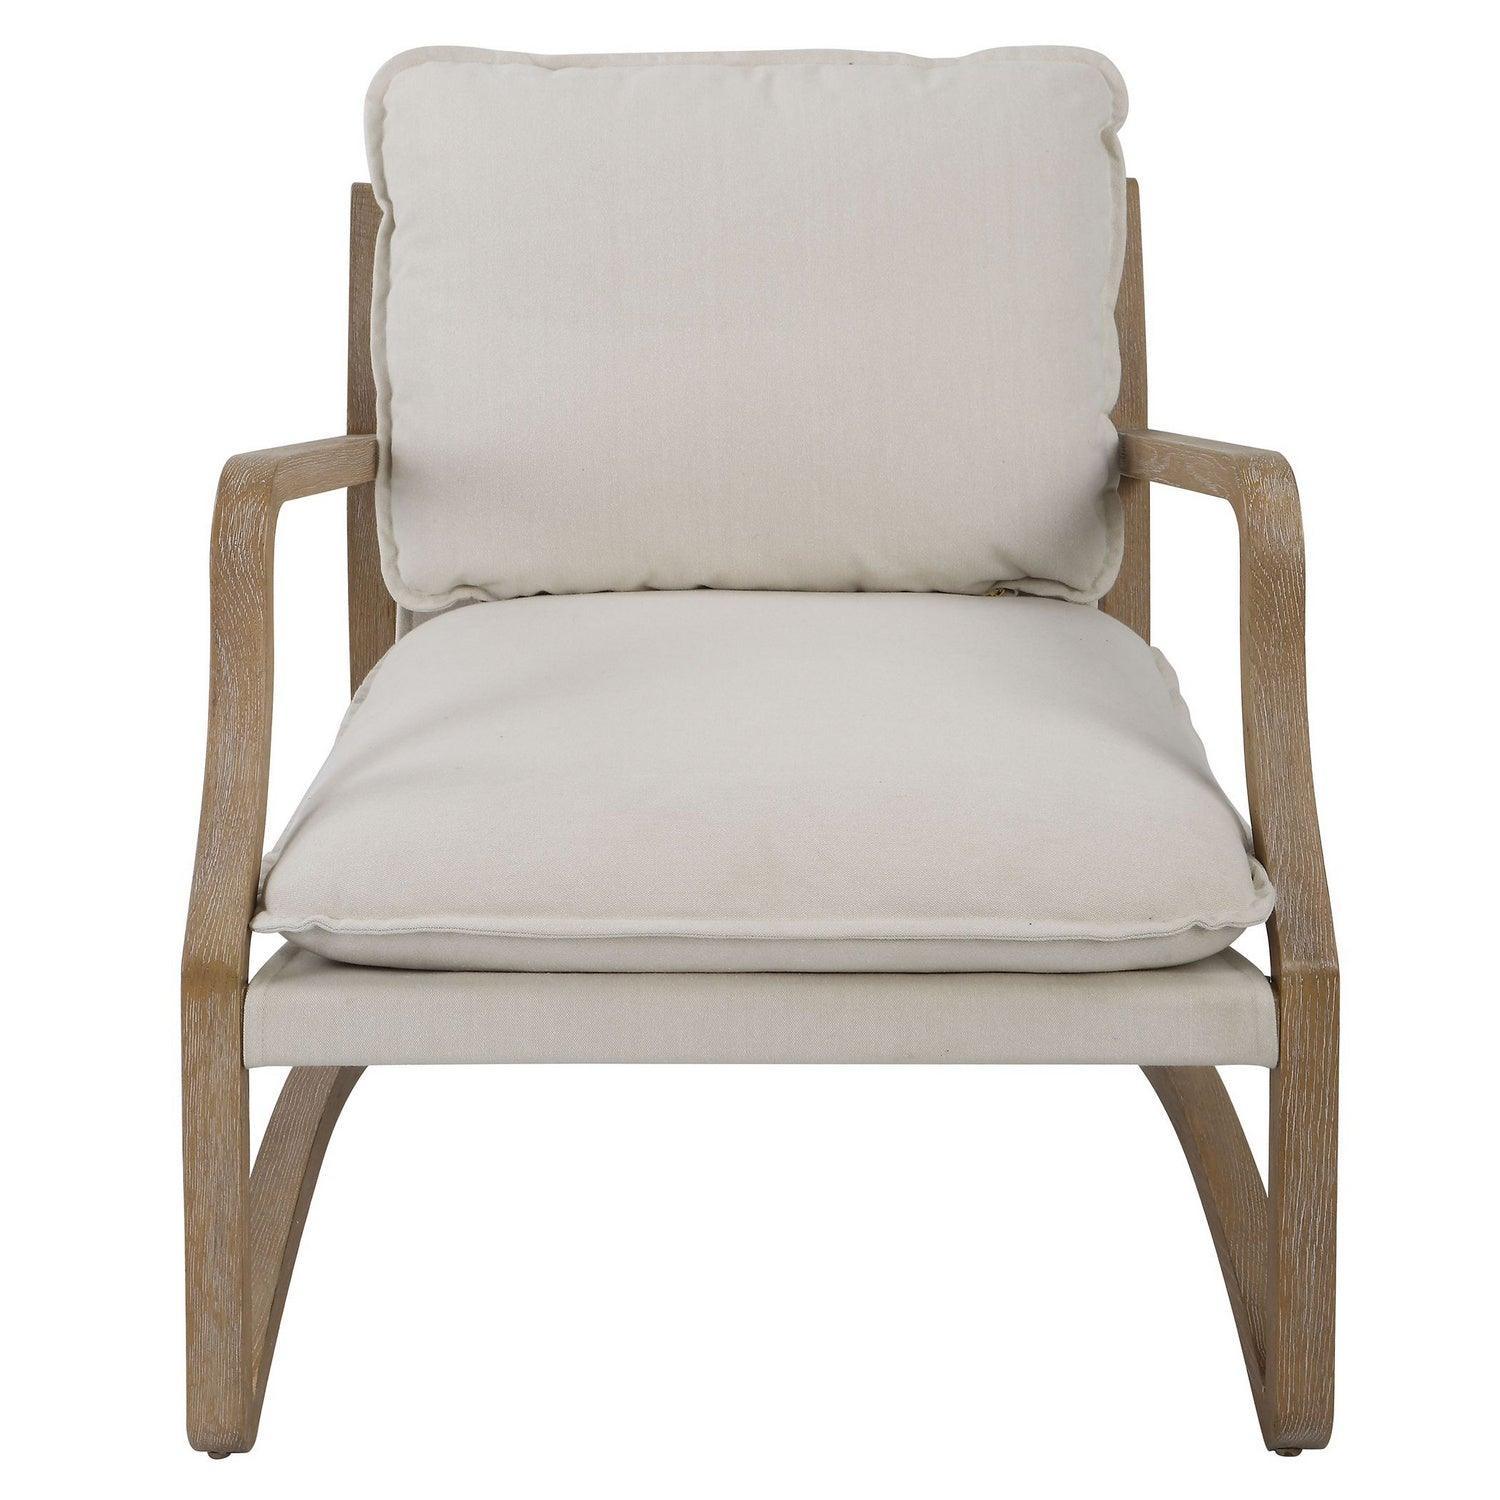 The Uttermost - Melora Accent Chair - 23712 | Montreal Lighting & Hardware